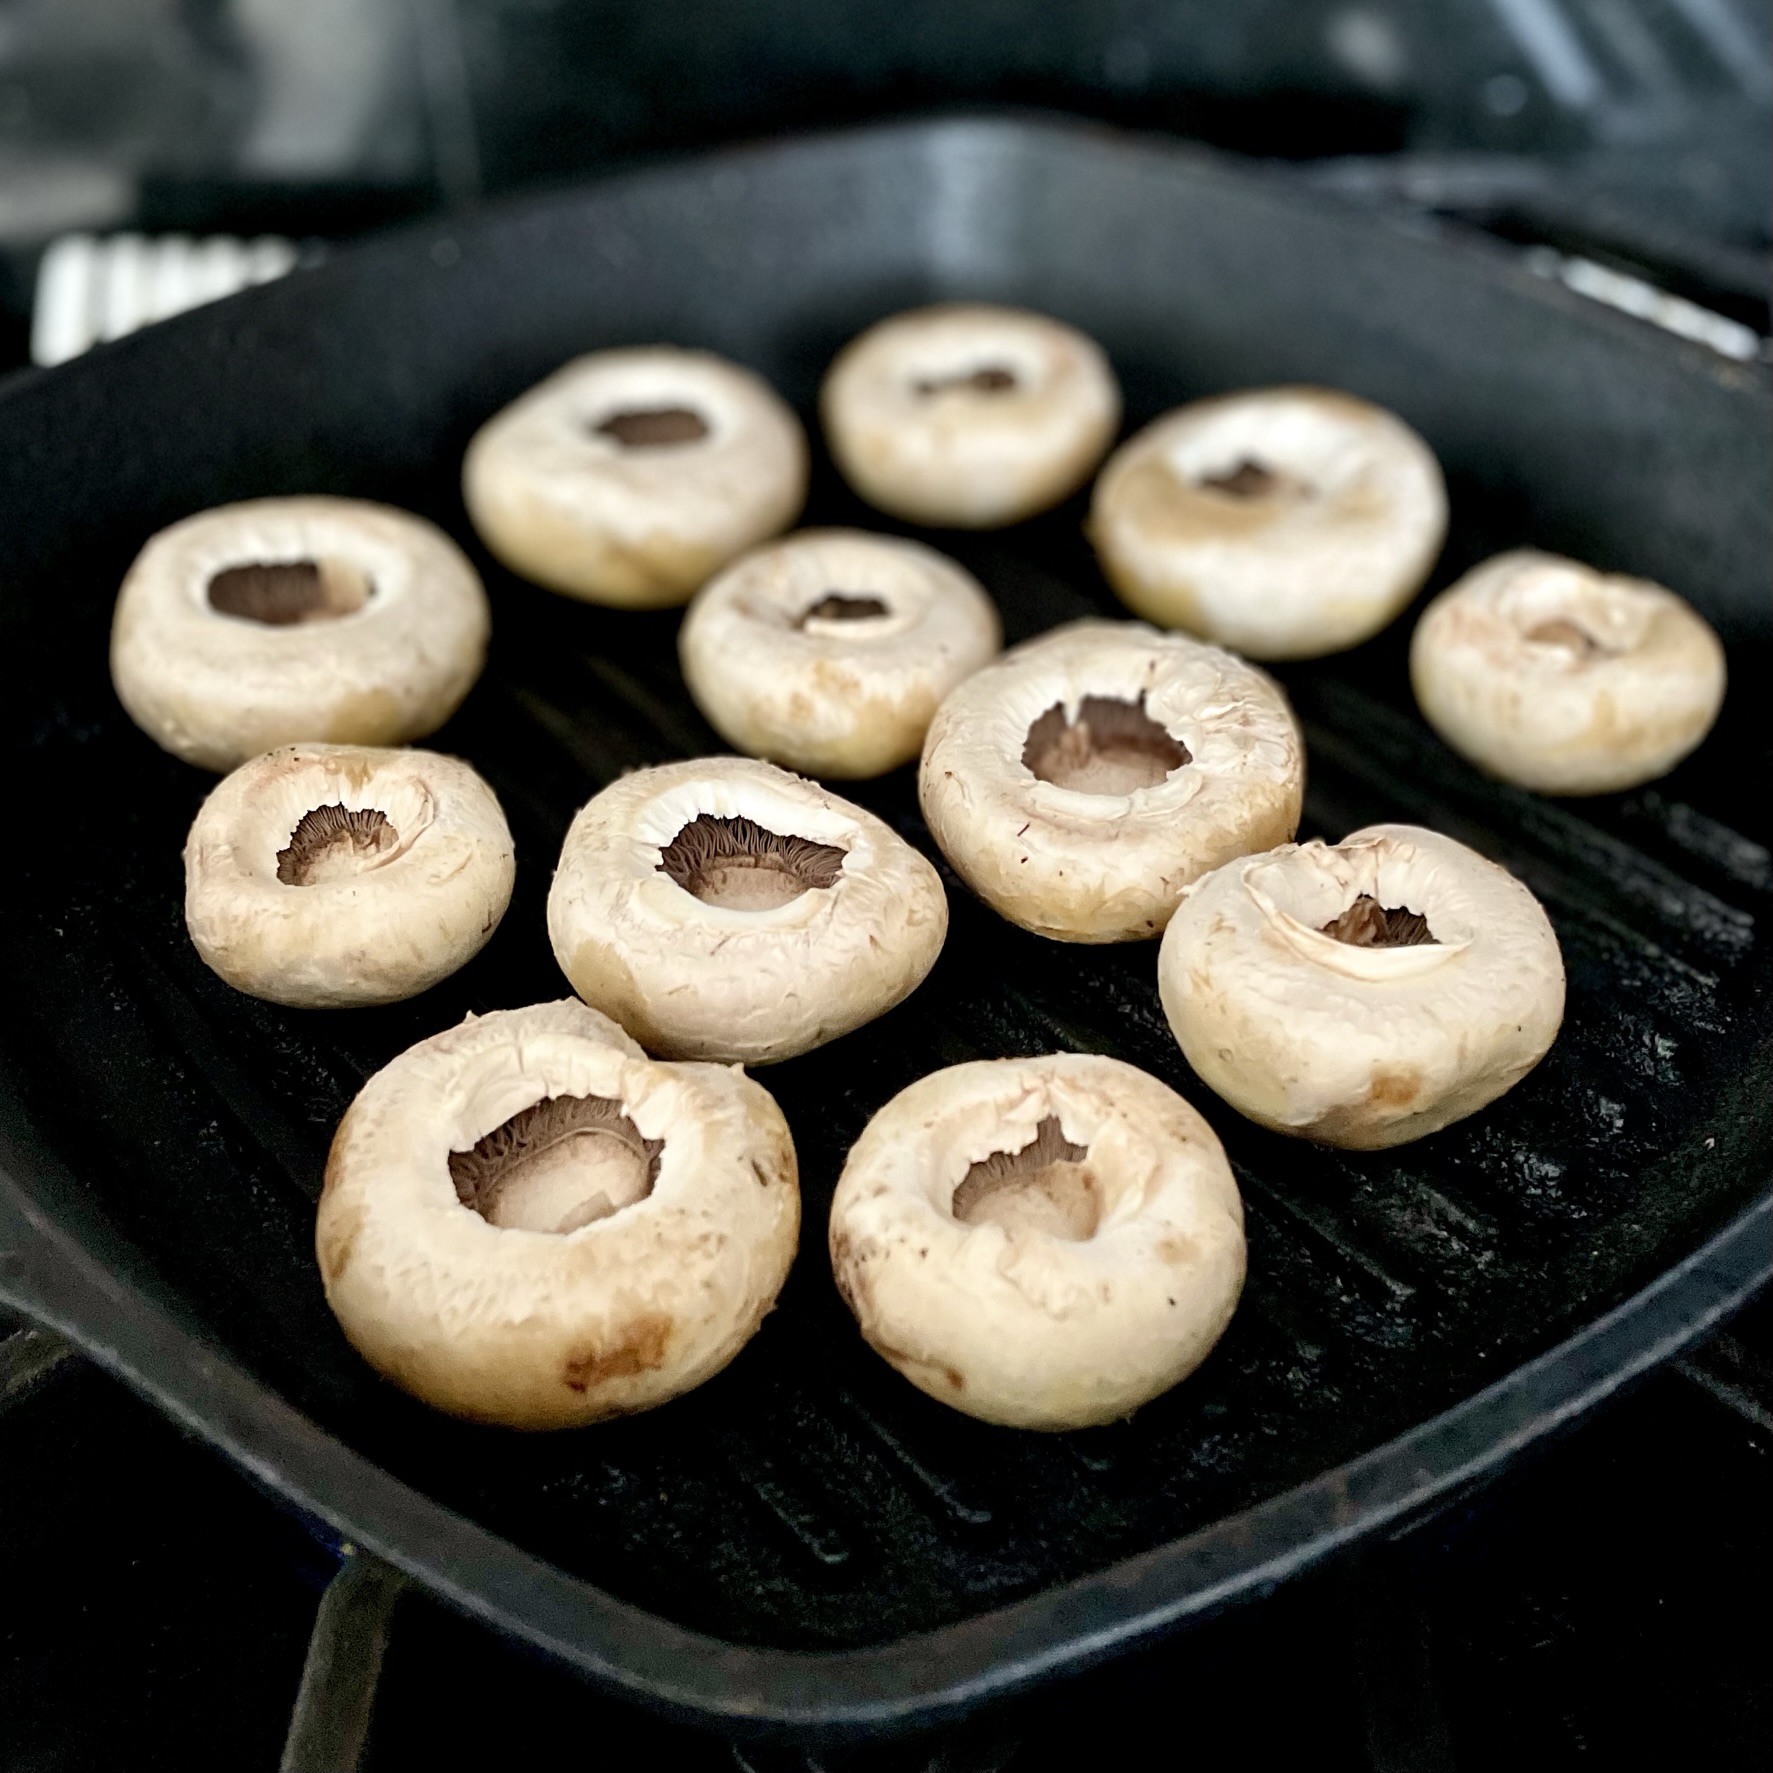 white button mushroom caps on grill pan